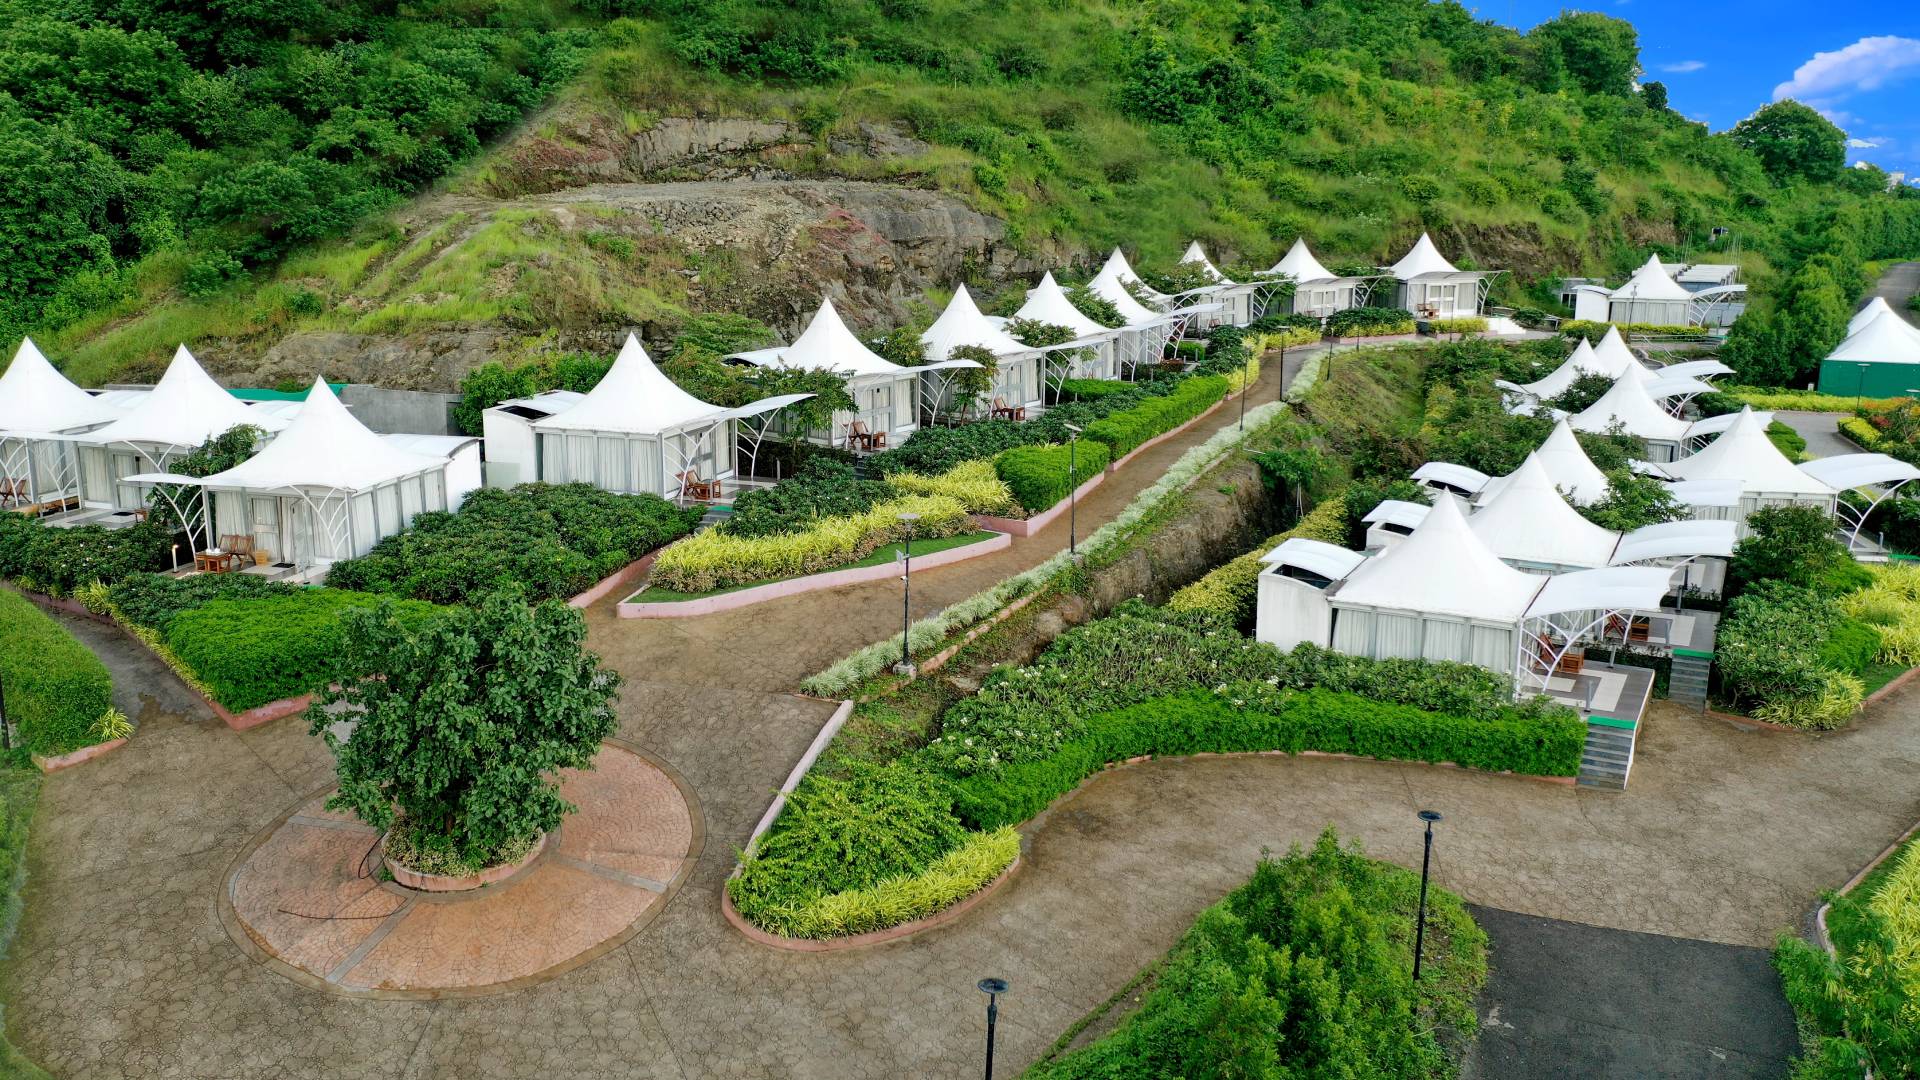 THE TOPAZ AC LUXURIOUS GLASS TENTS at Sunny's World Pune (8)